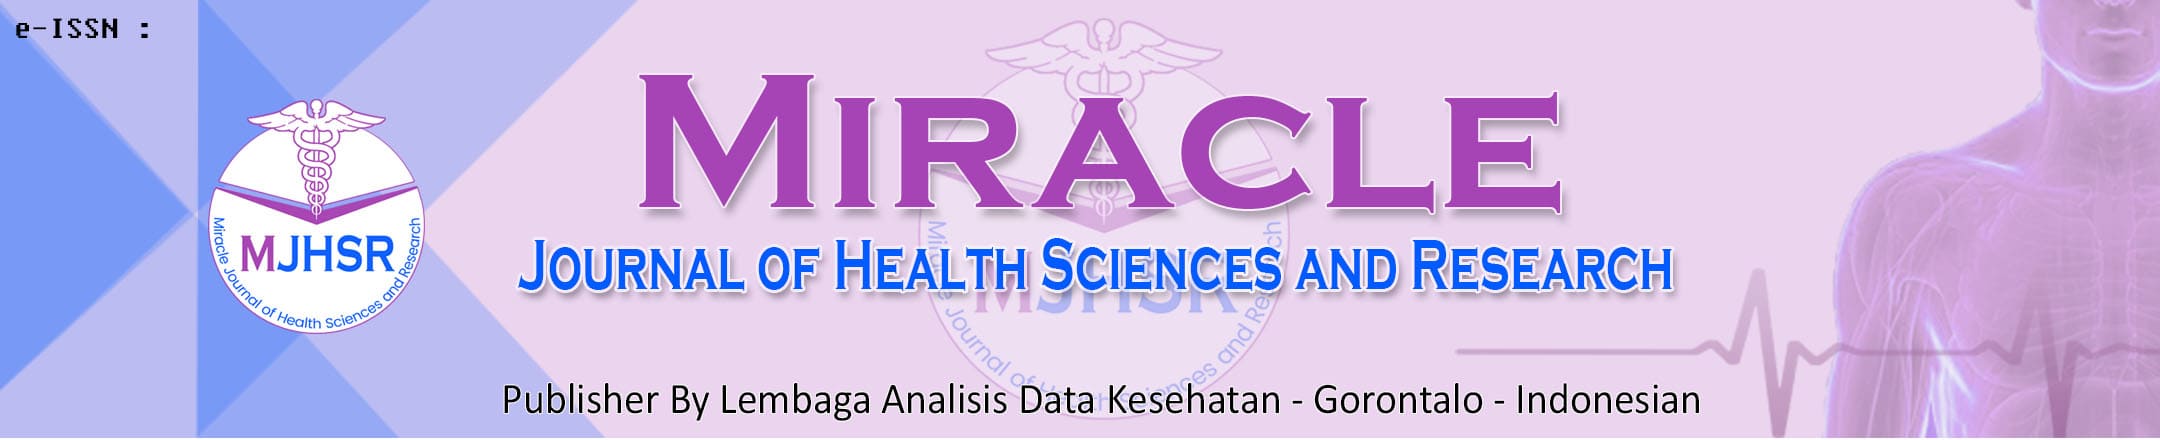 Journal of Health Sciences and Research